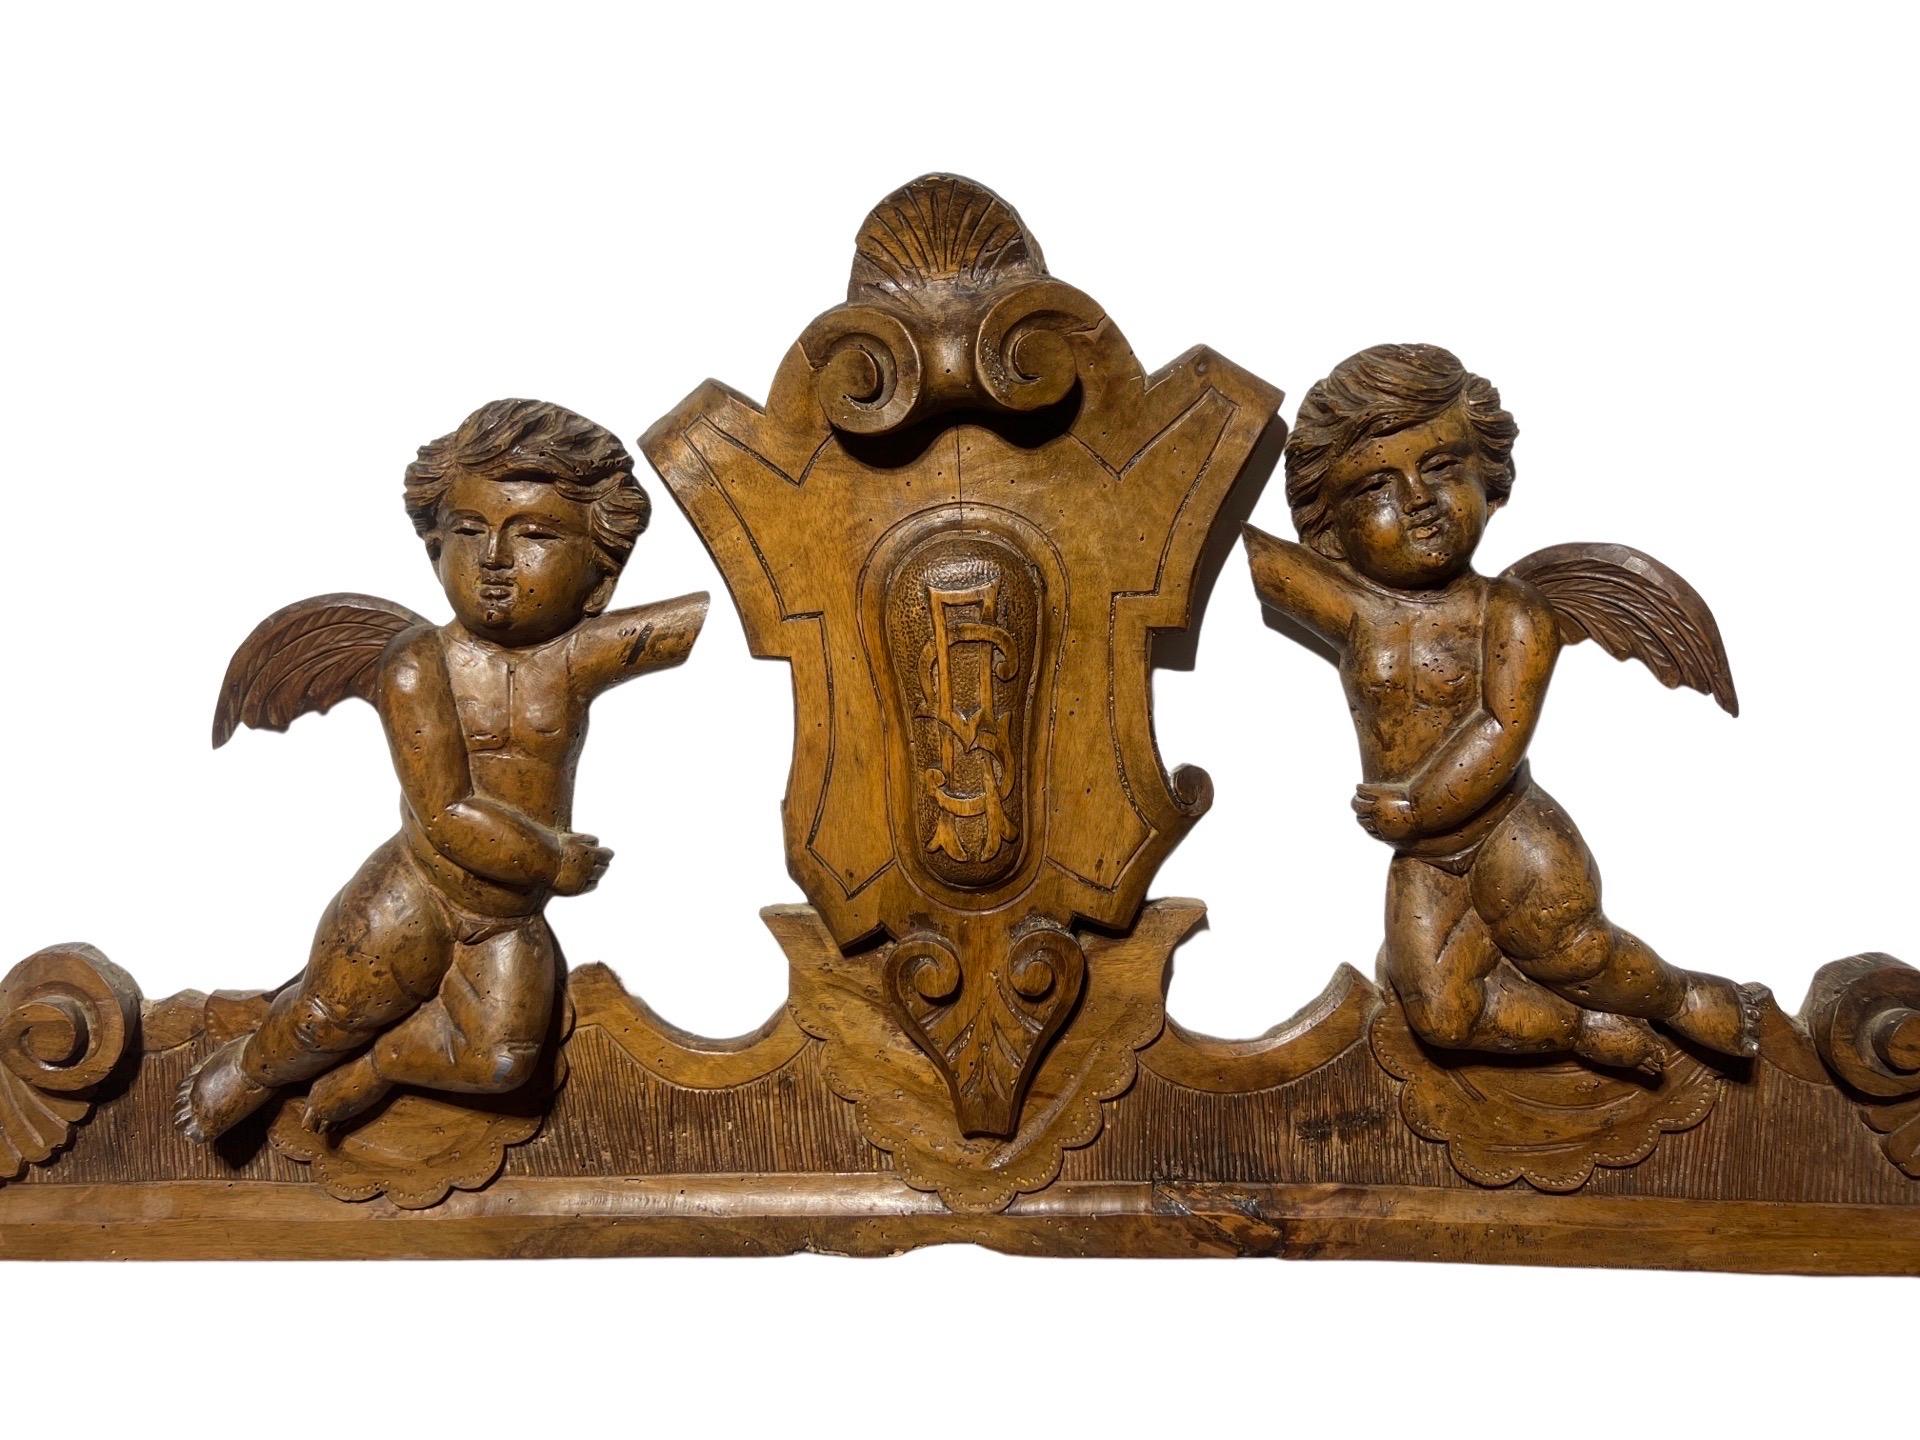 A lovely 19th century French Renaissance Revival architectural fragment depicting two winged putti or cherubs flanking a central monogramed cartouche. This carving was likely from an elaborate piece of furniture and made into a wall carving in the